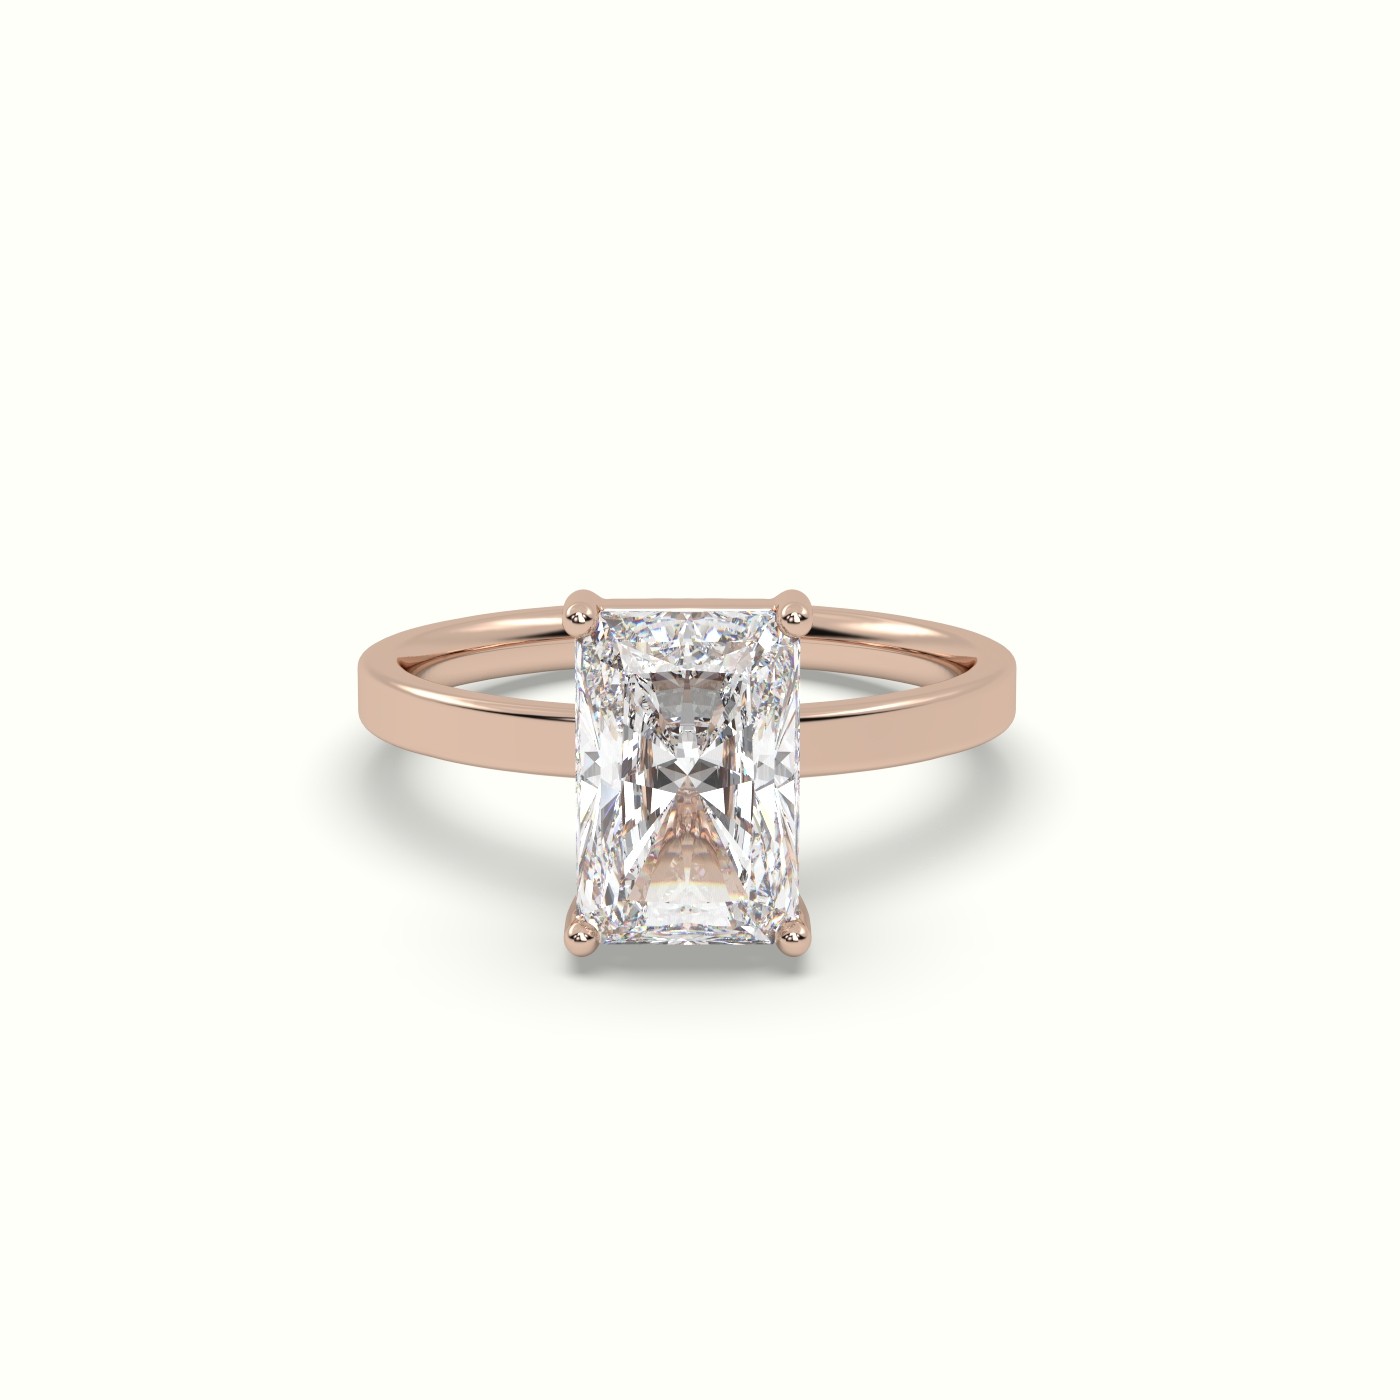 18K ROSE GOLD Radiant Cut Solitaire Diamond Ring Precious Jewels Antwerp Radiance